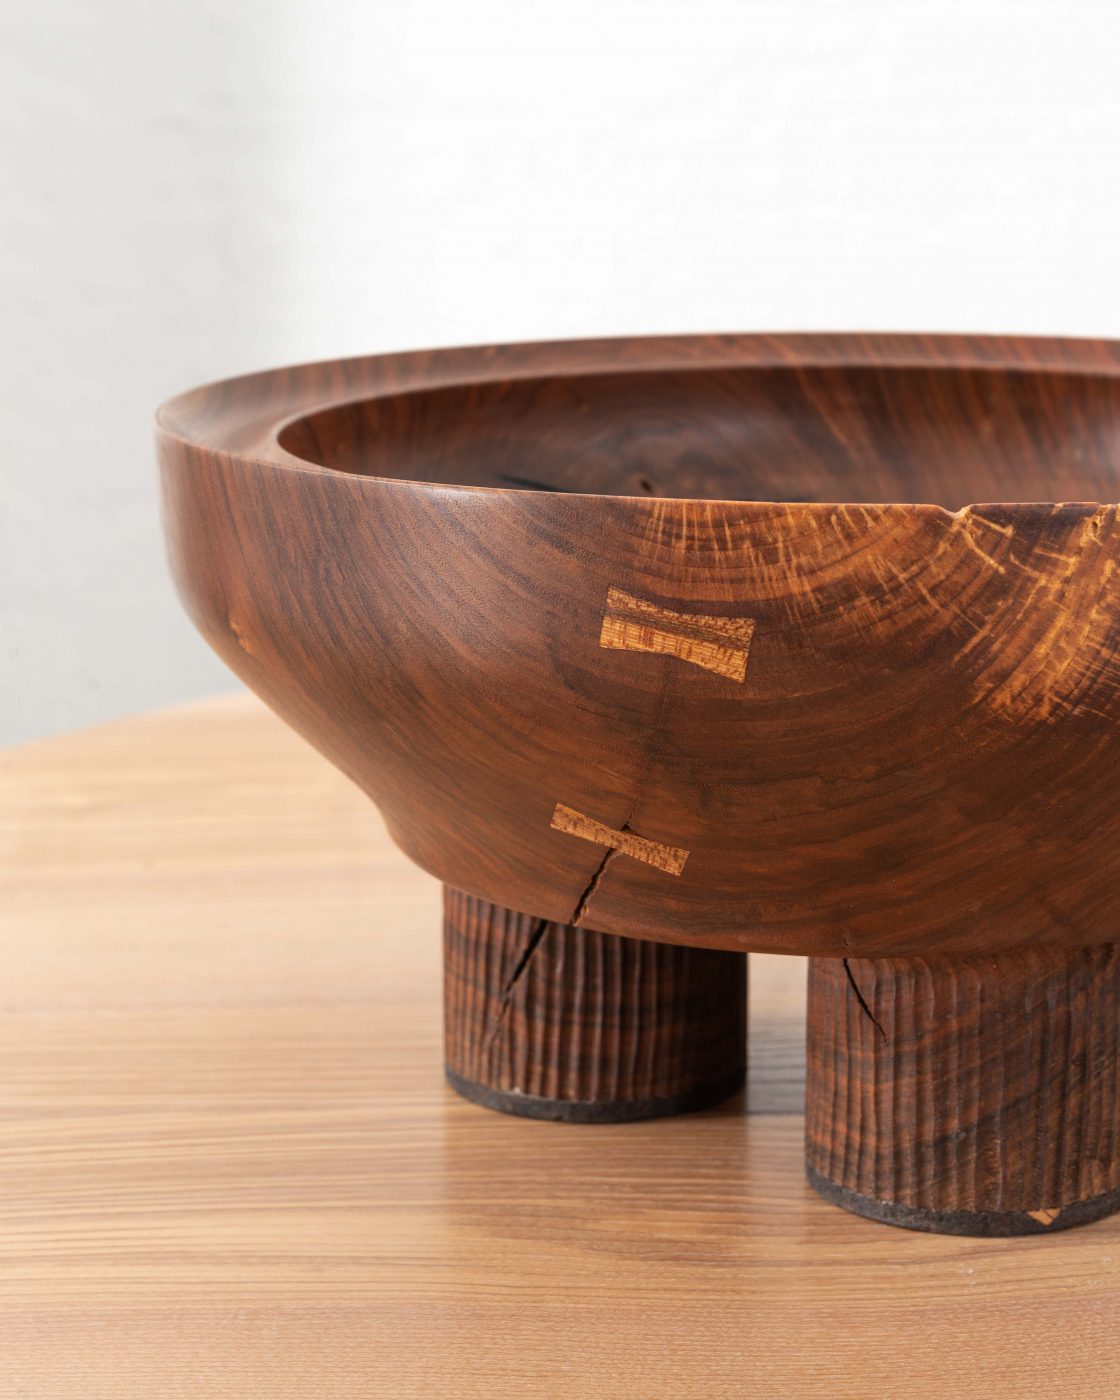 Three Legger, Turned and hand carved vessel from a single piece of English walnut. rare timber comes from Dog kennel hill, Camberwell, London. Elm dovetail keys have been utilised to tie the object together.